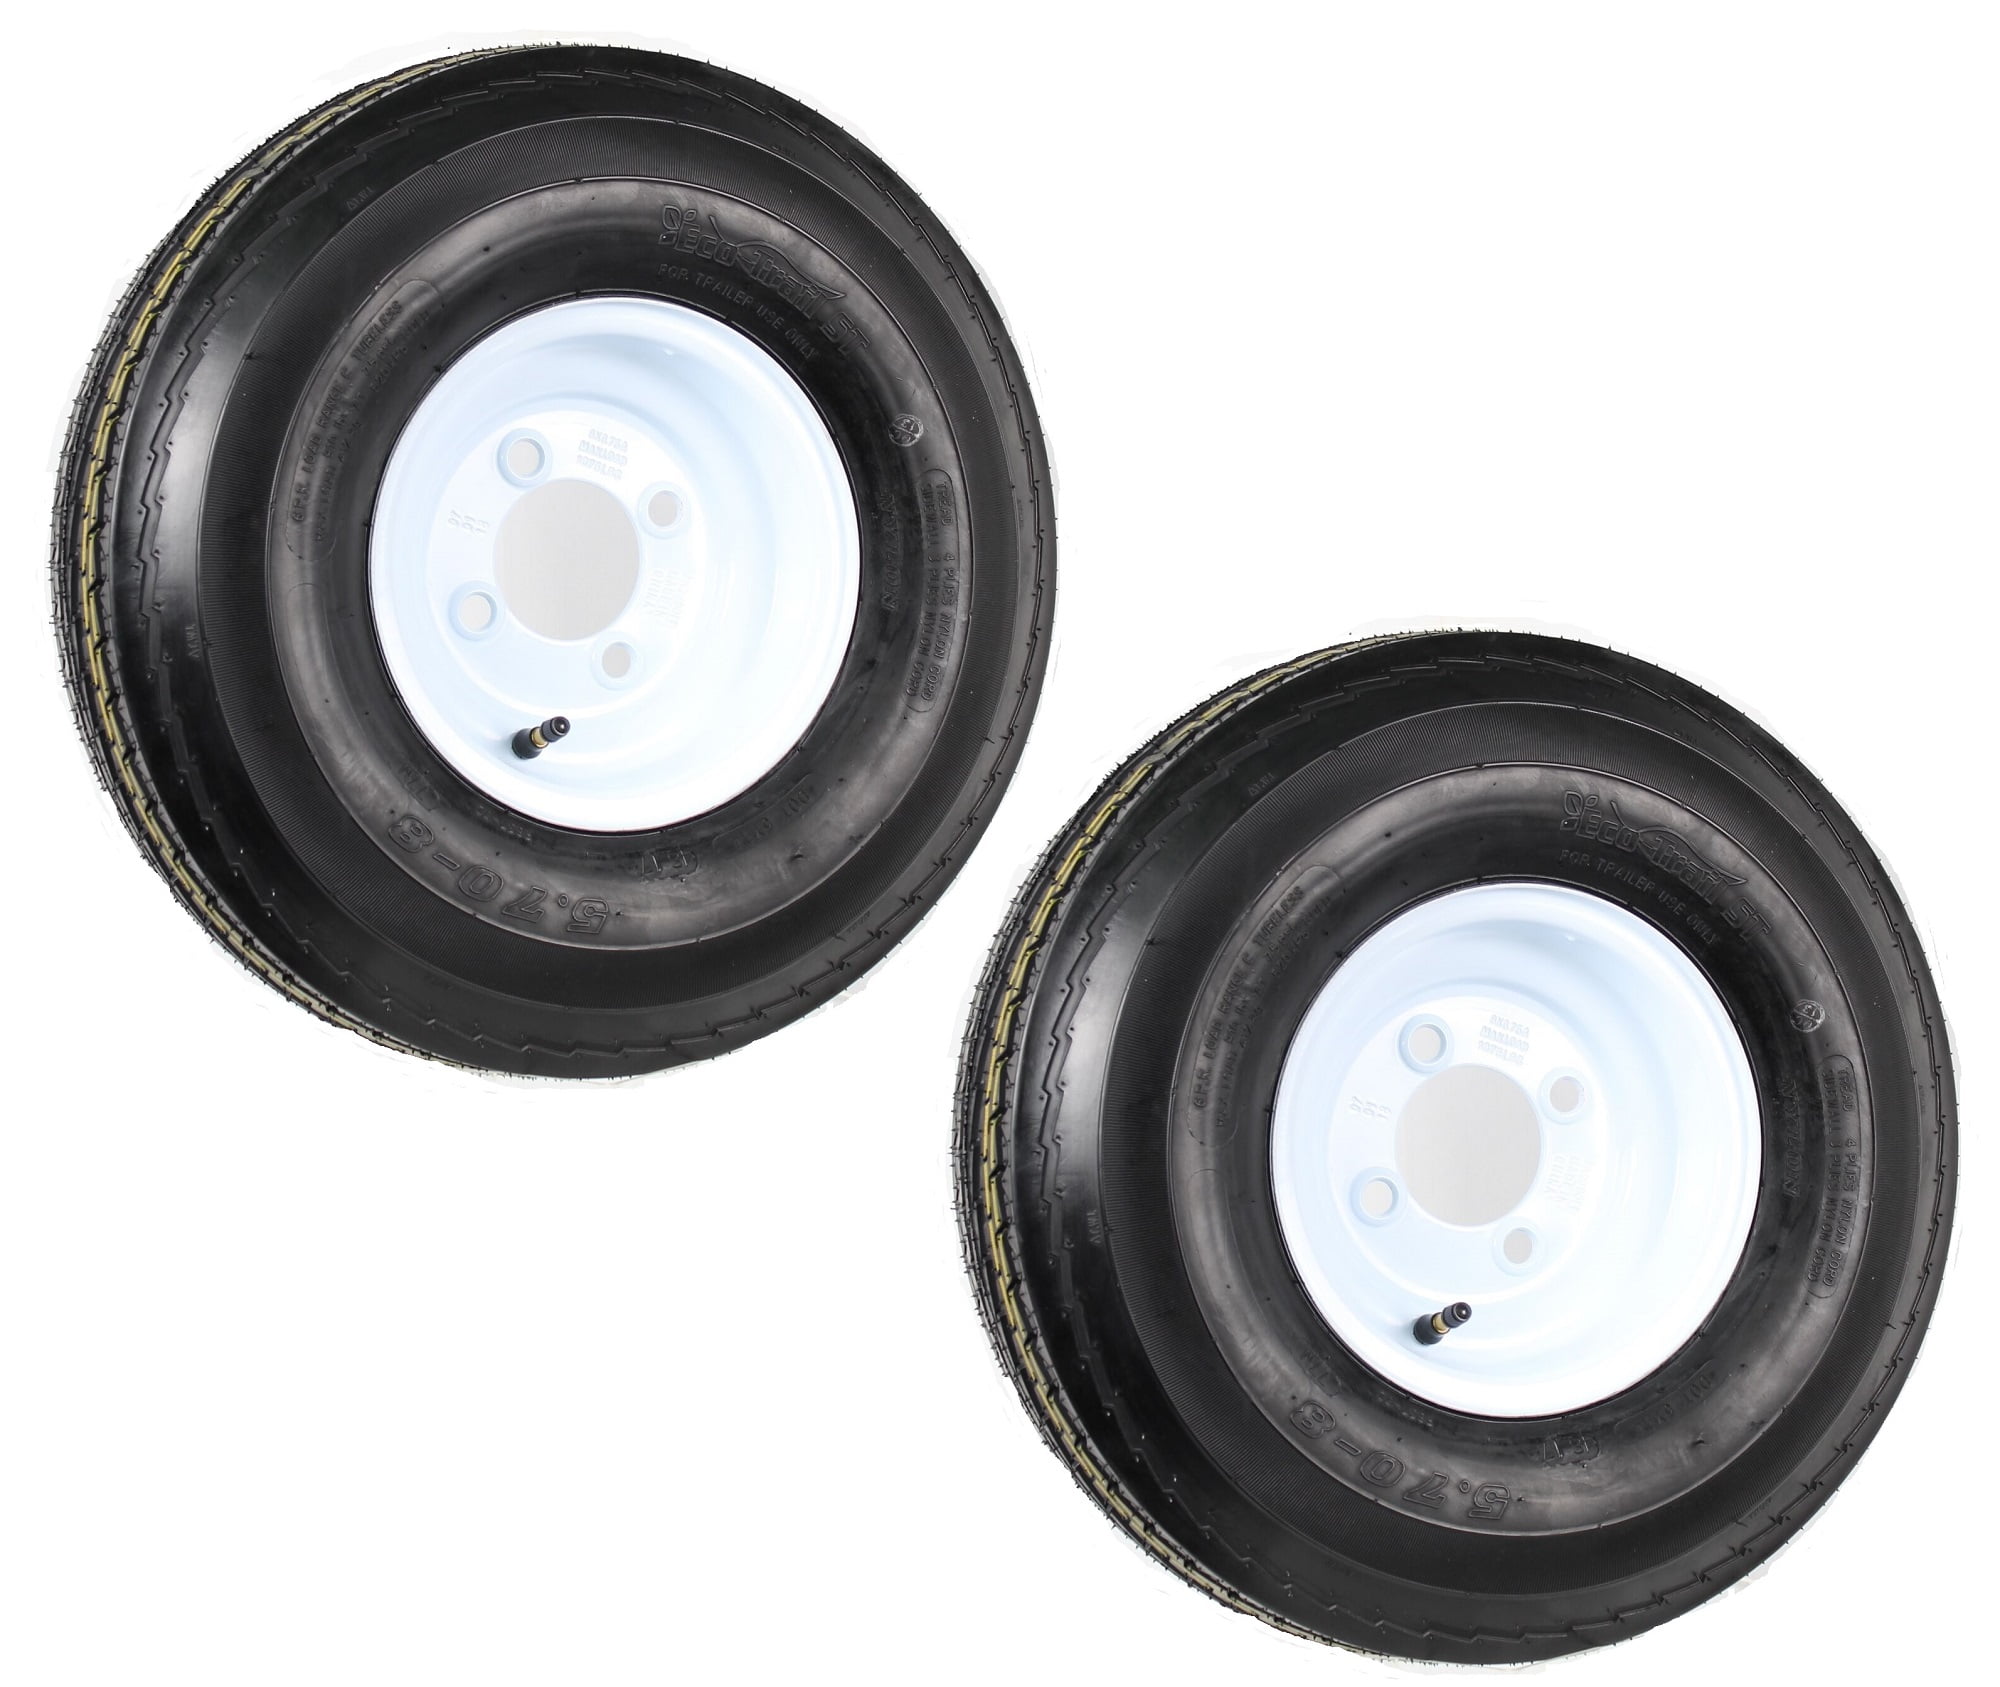 Load C 4 Lug White 2-Pack Trailer Tire On Rim 570-8 5.70-8 8 in 